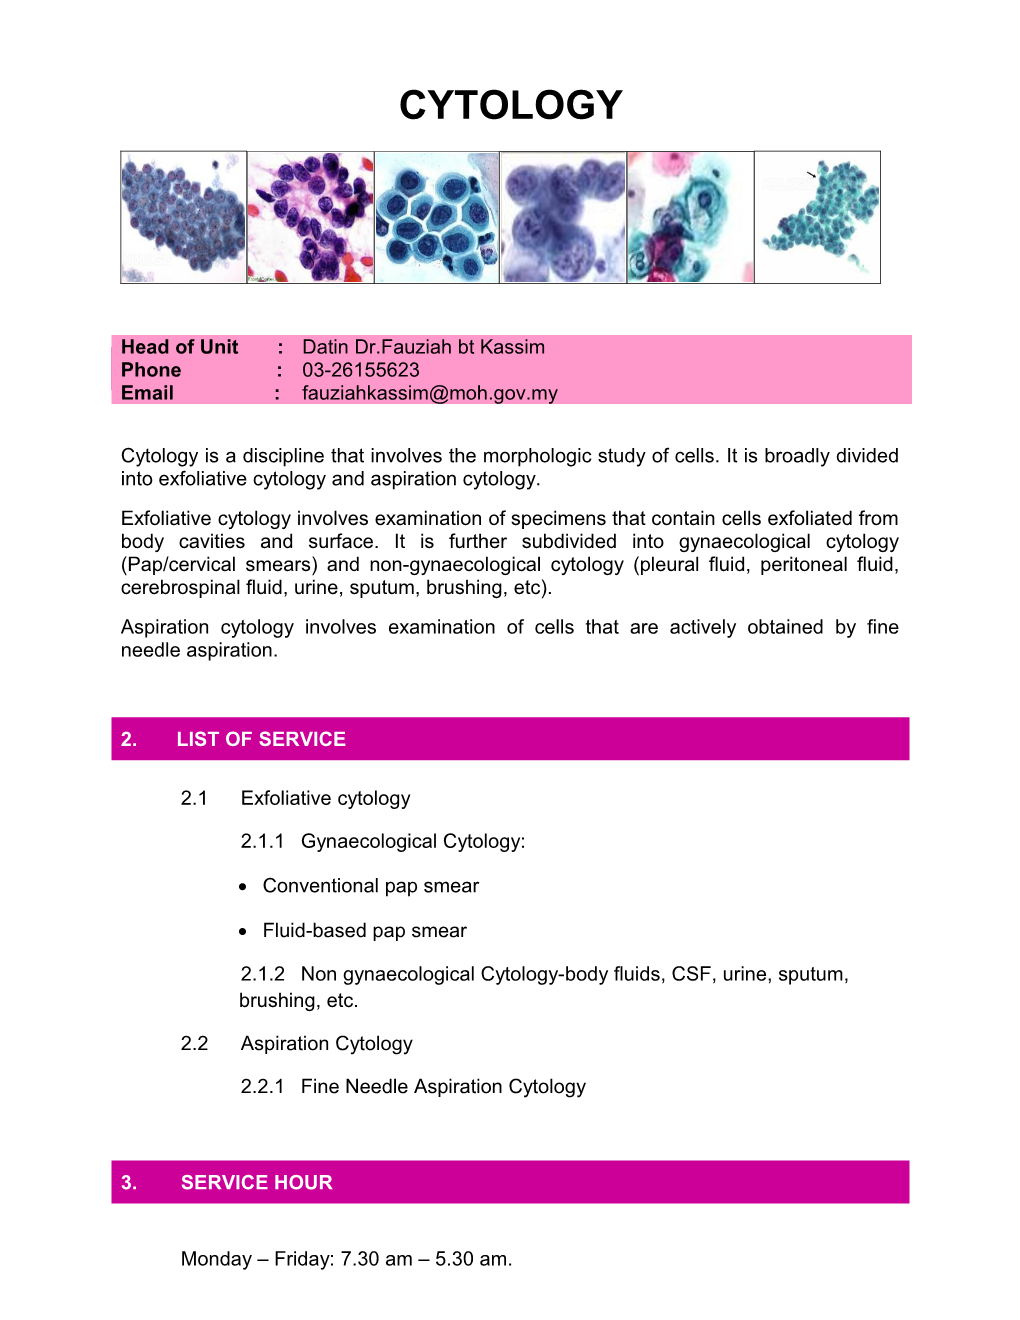 Cytologyis a Discipline That Involves the Morphologic Study of Cells. It Is Broadly Divided